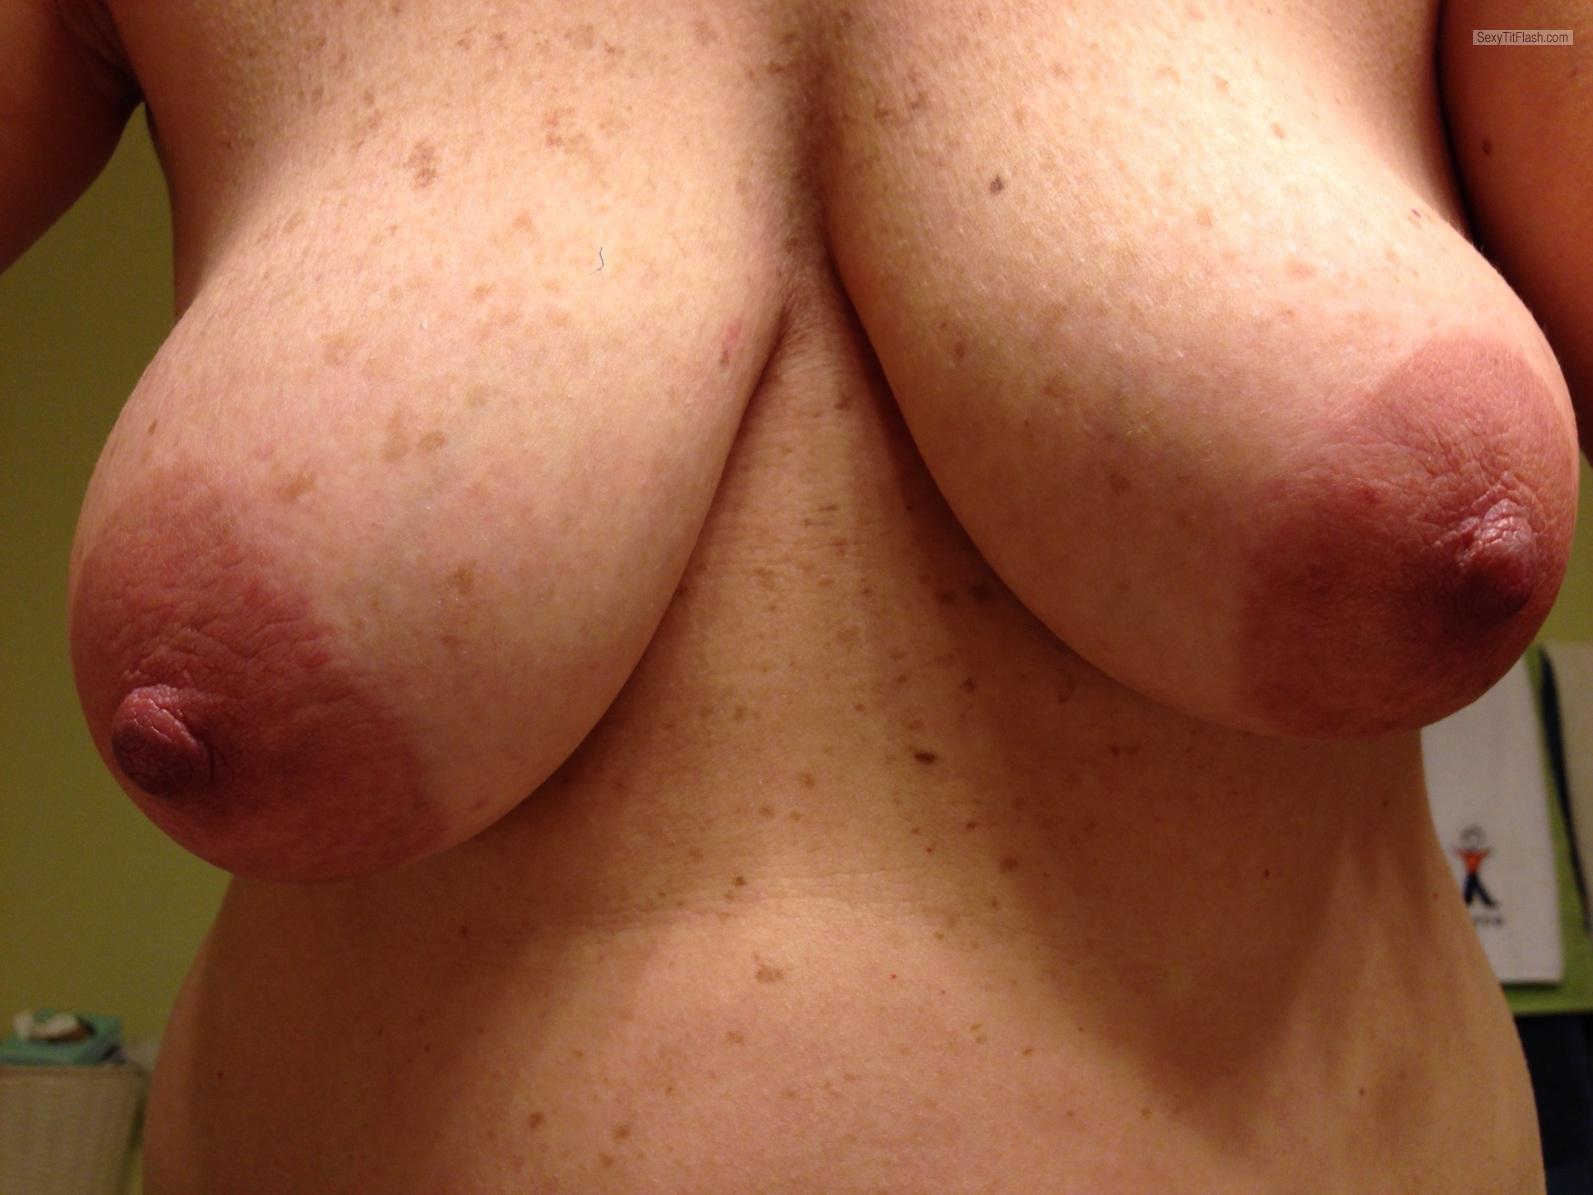 Tit Flash: My Very Big Tits (Selfie) - Areola Hangers from Australia. 